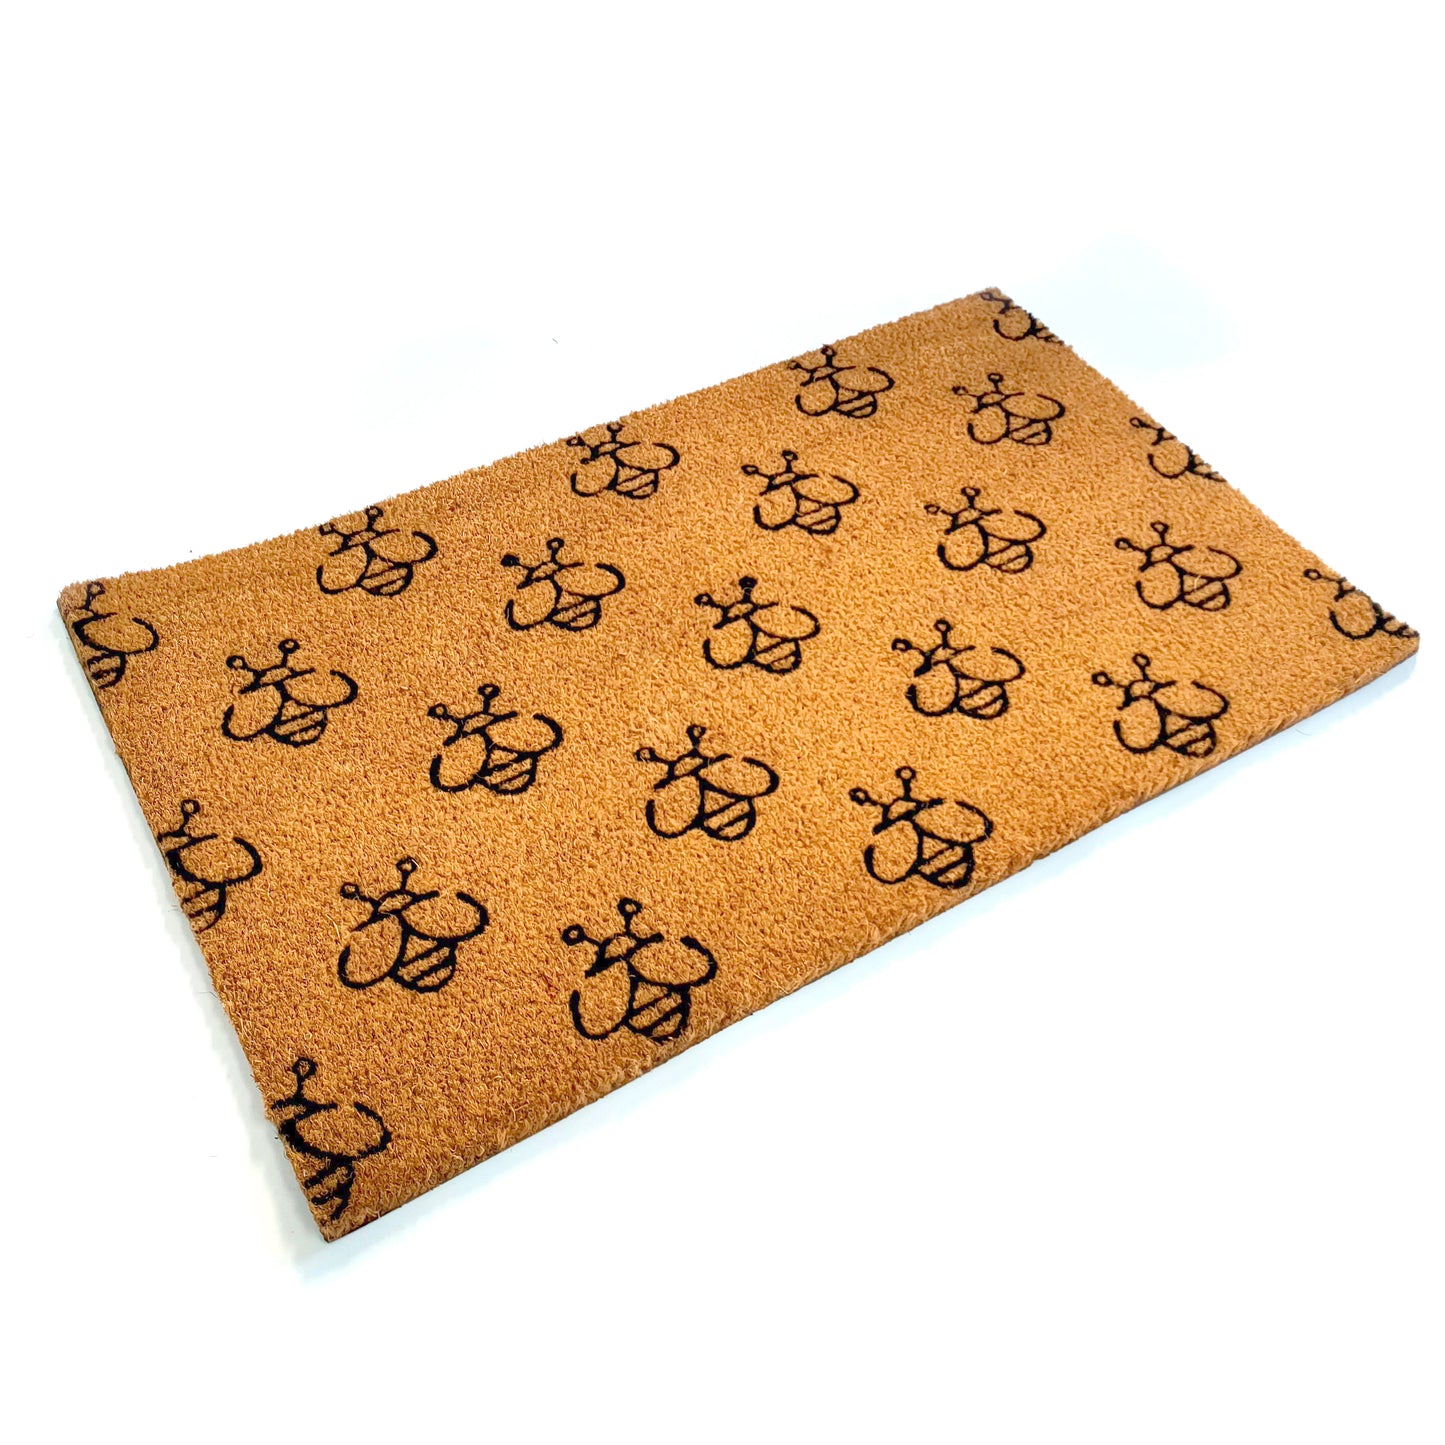 Country Chic Coir Door Mat with Repeating Bumble Bee Pattern | 75cm x 45cm | Durable, Slip-Resistant, and Eco-Friendly